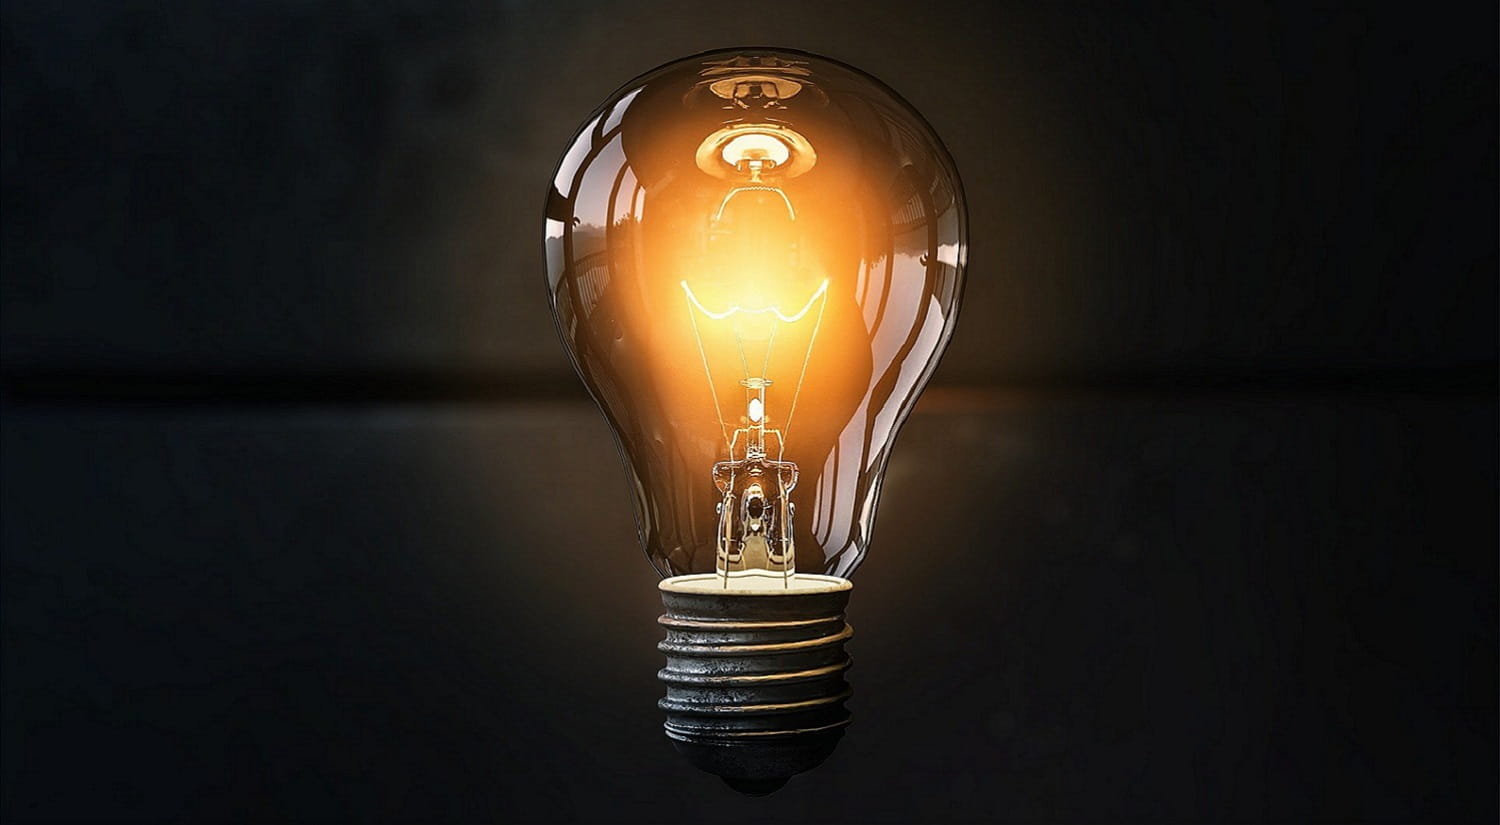 A light bulb against a dark backdrop, representing ideas and innovation.